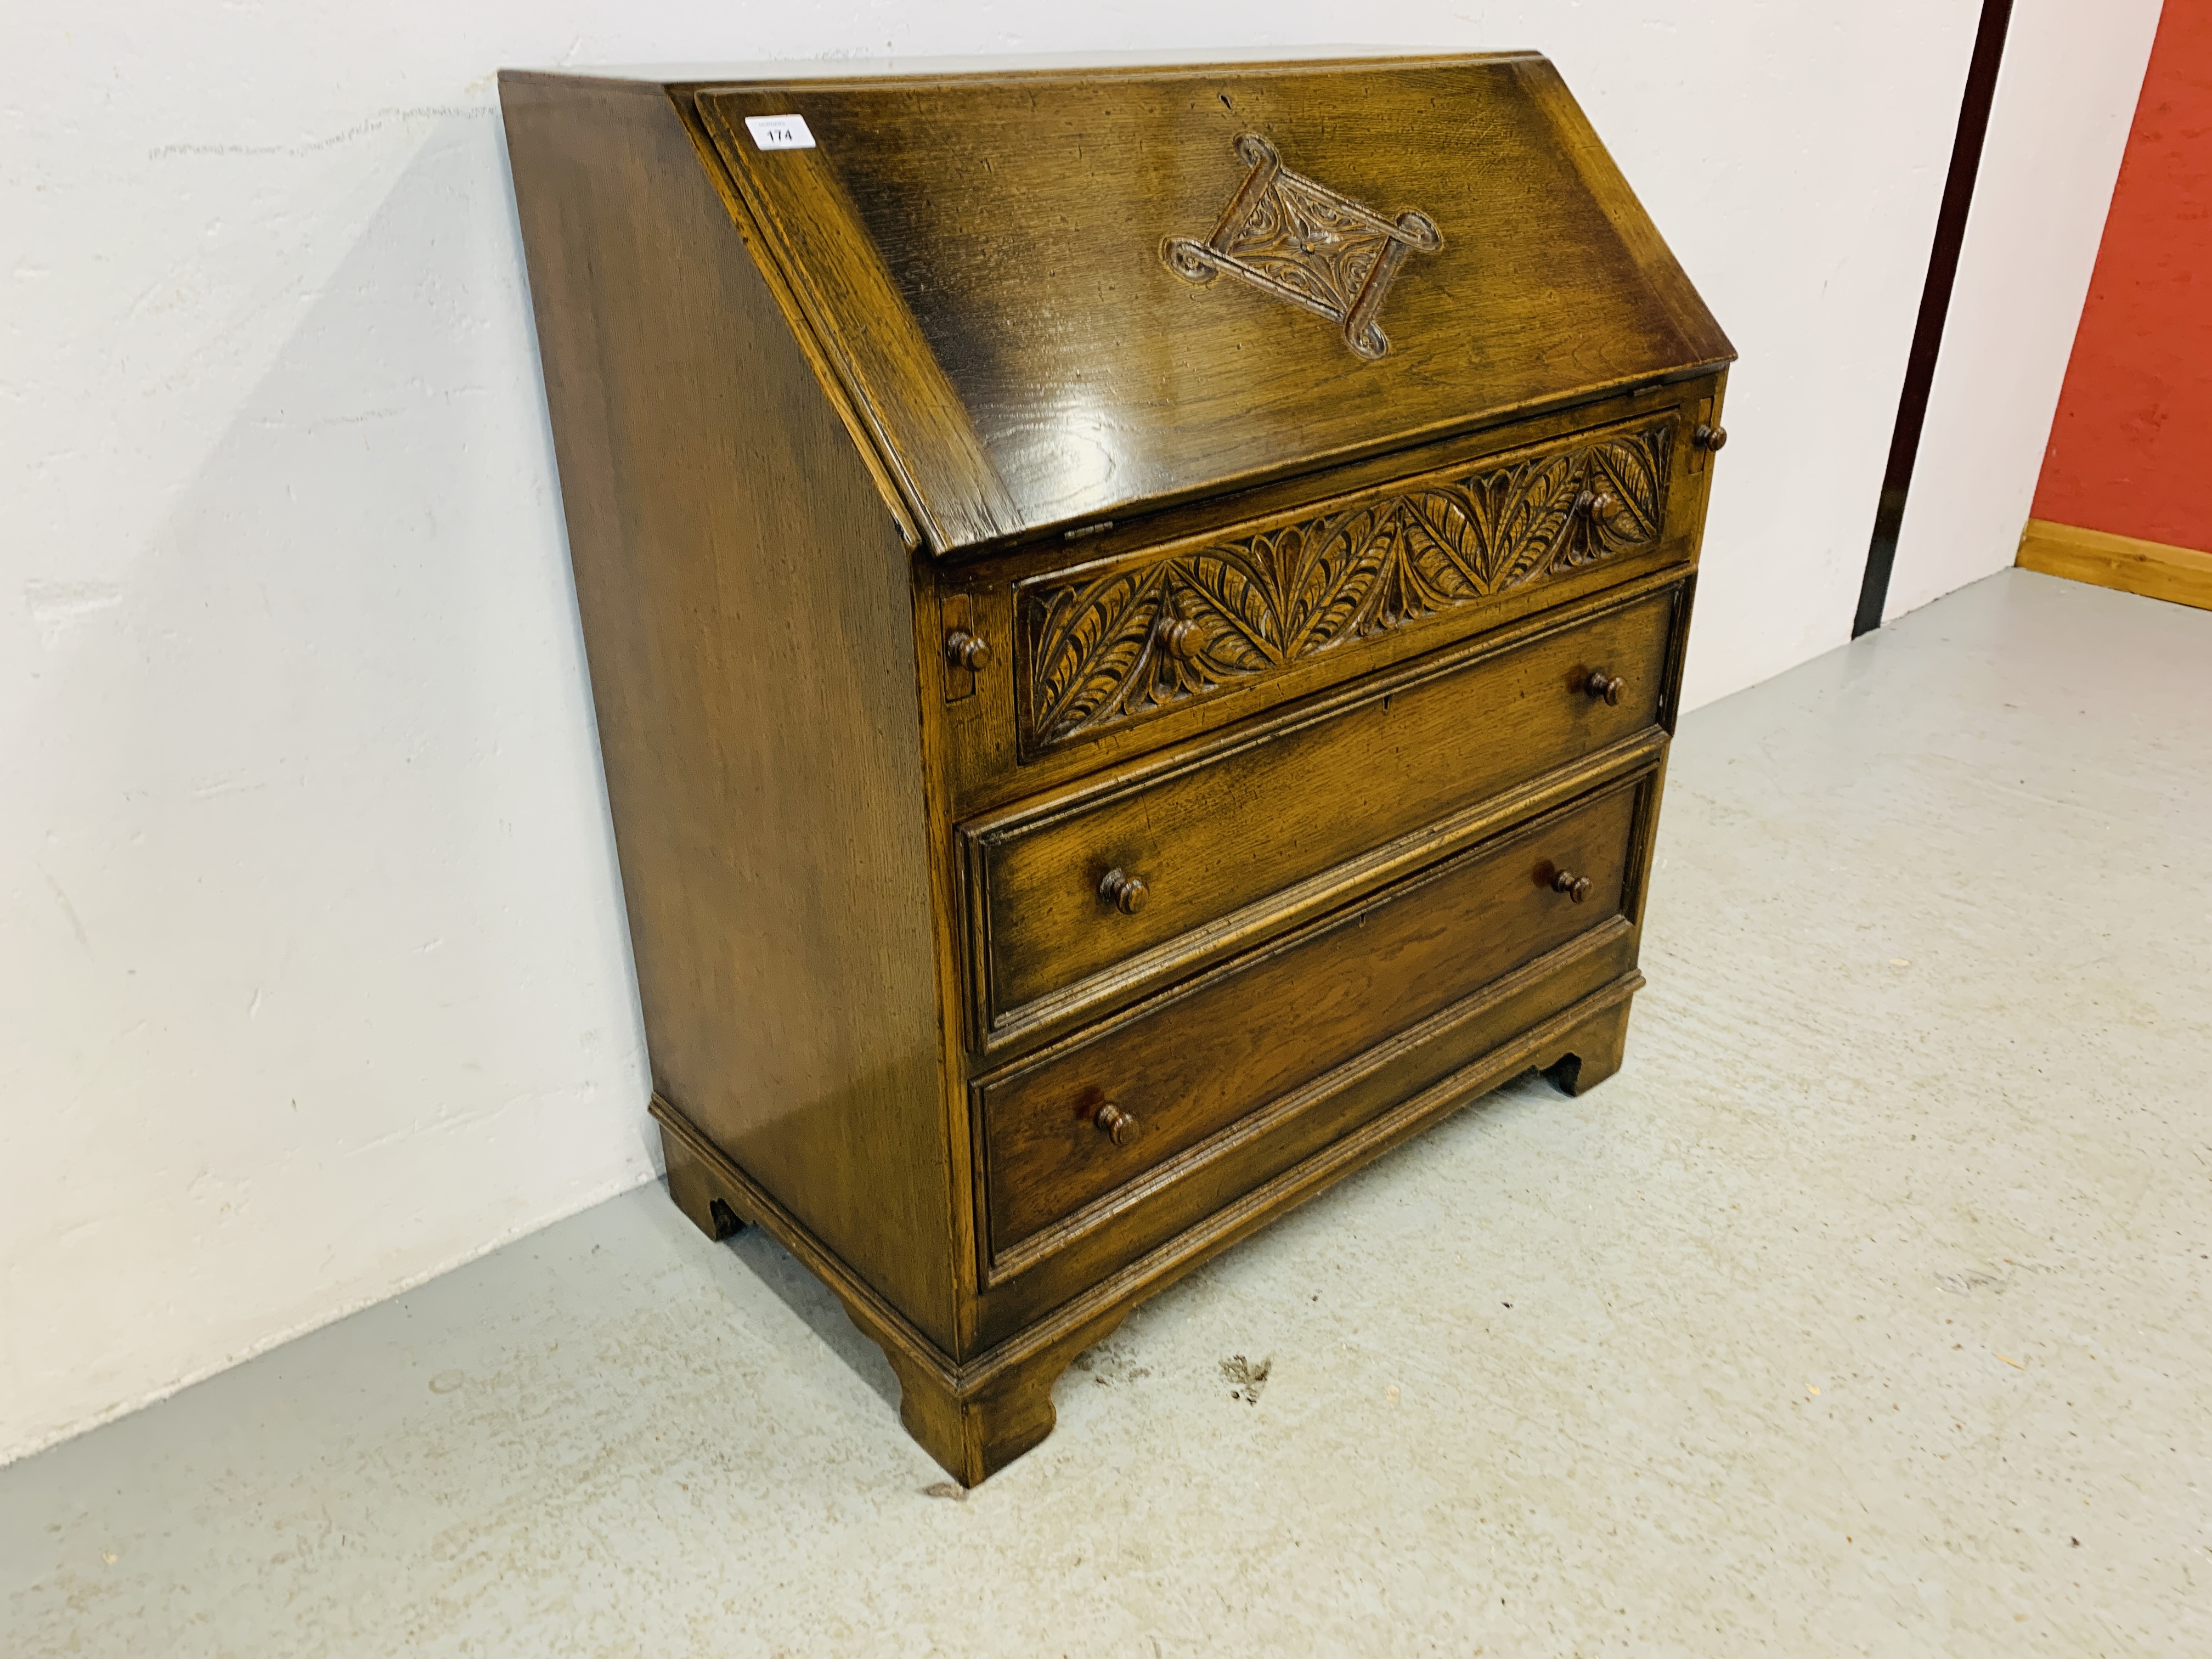 GOOD QUALITY REPRODUCTION OAK THREE DRAWER BUREAU WITH WELL FITTED INTERIOR - W 85CM. D 48CM. - Image 3 of 10